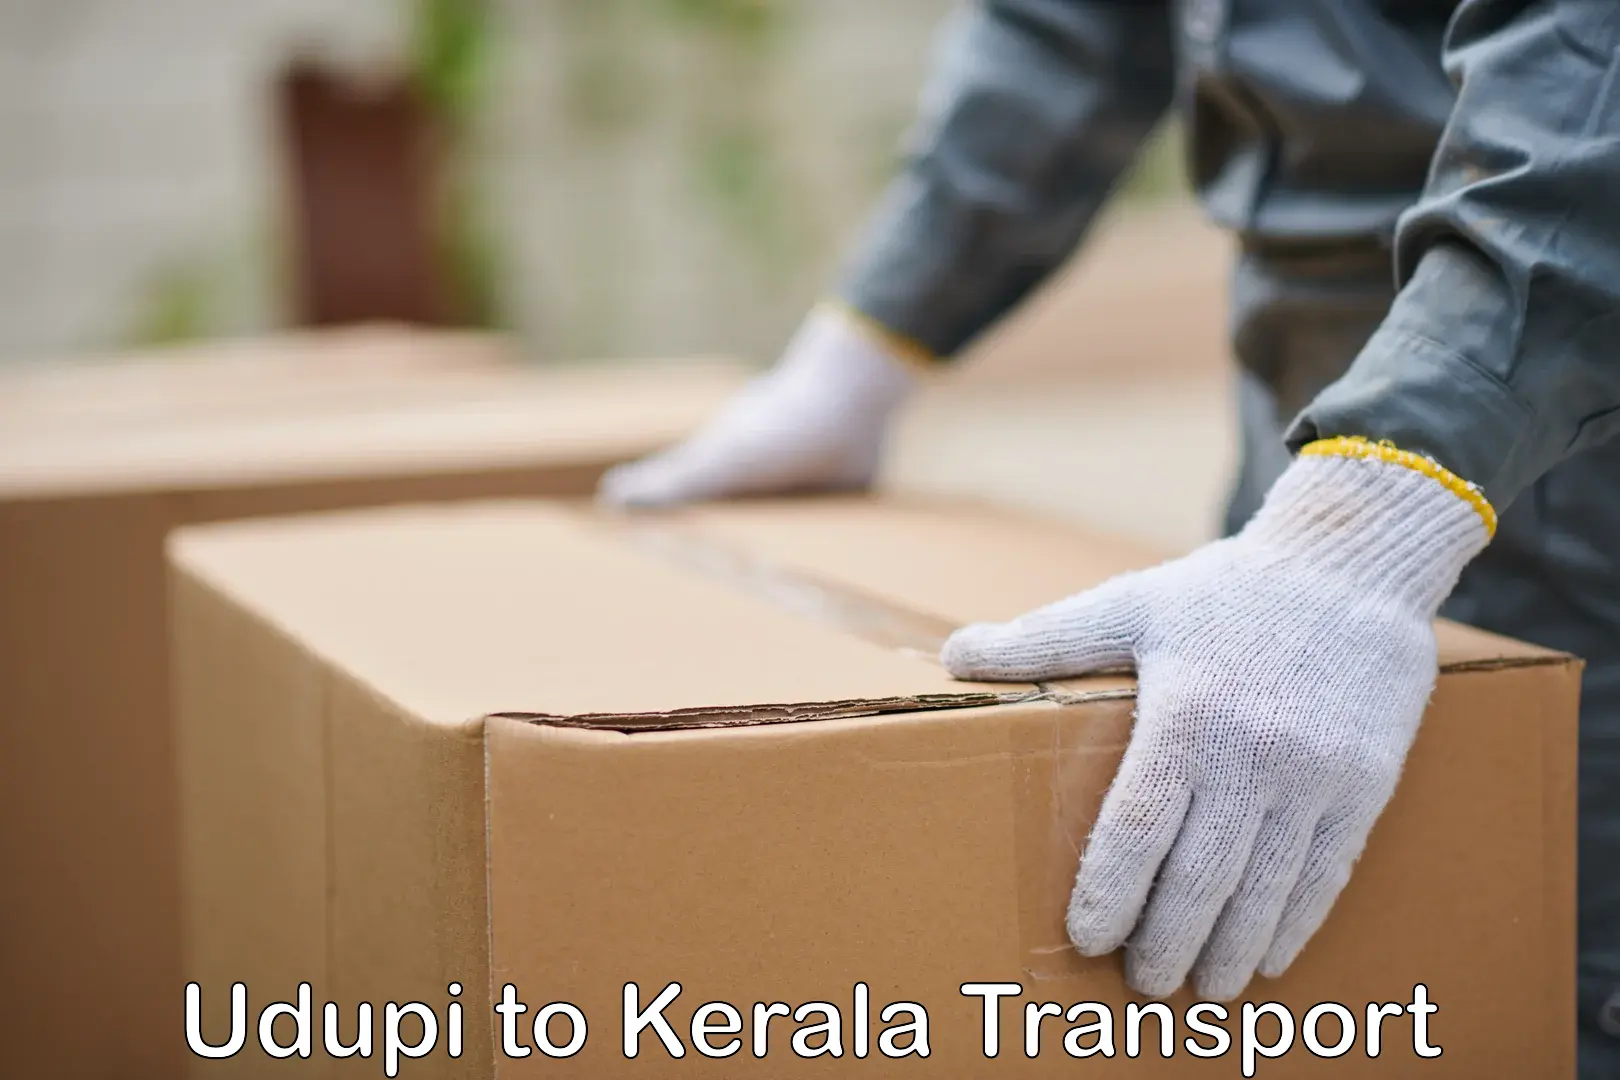 Goods delivery service Udupi to Cochin